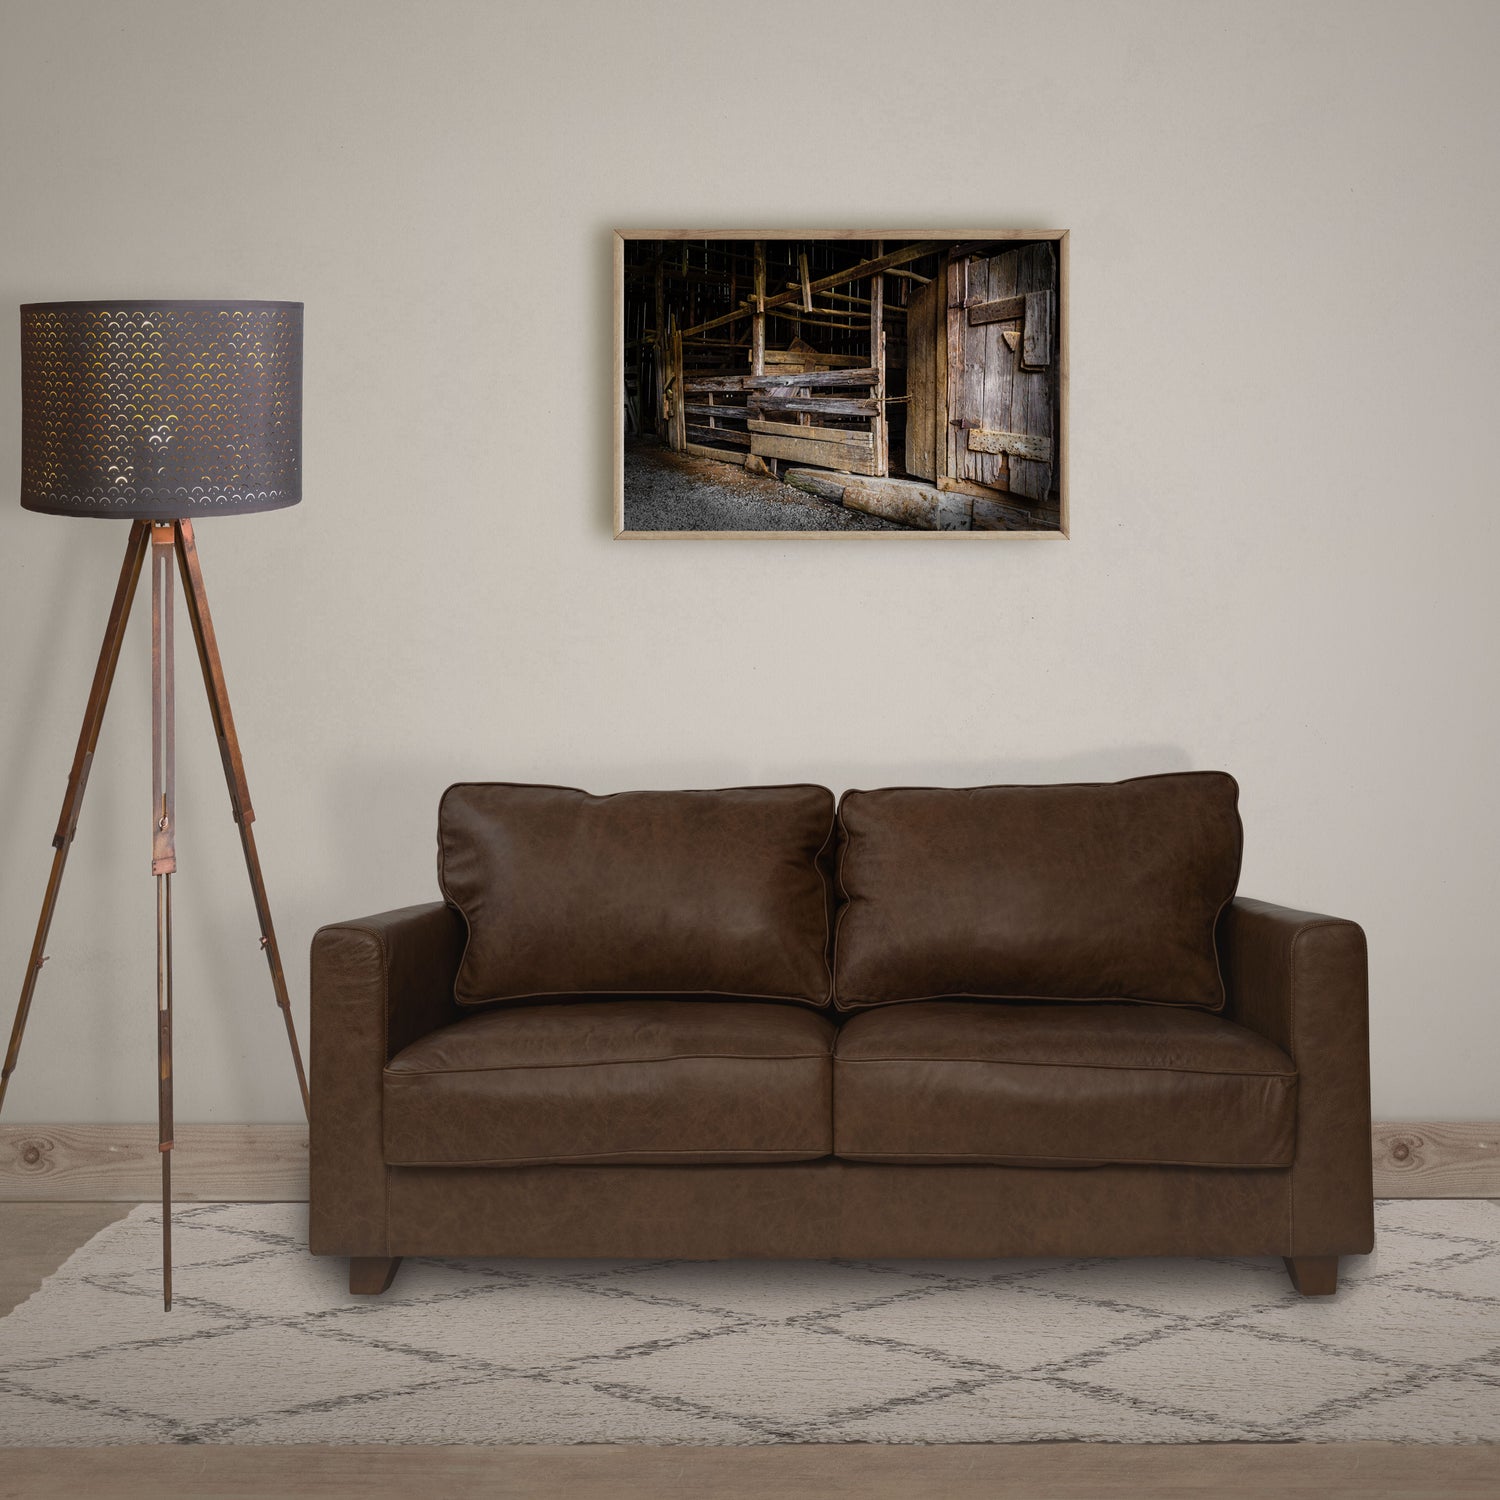 Rustic wall decor featuring the view inside an old barn